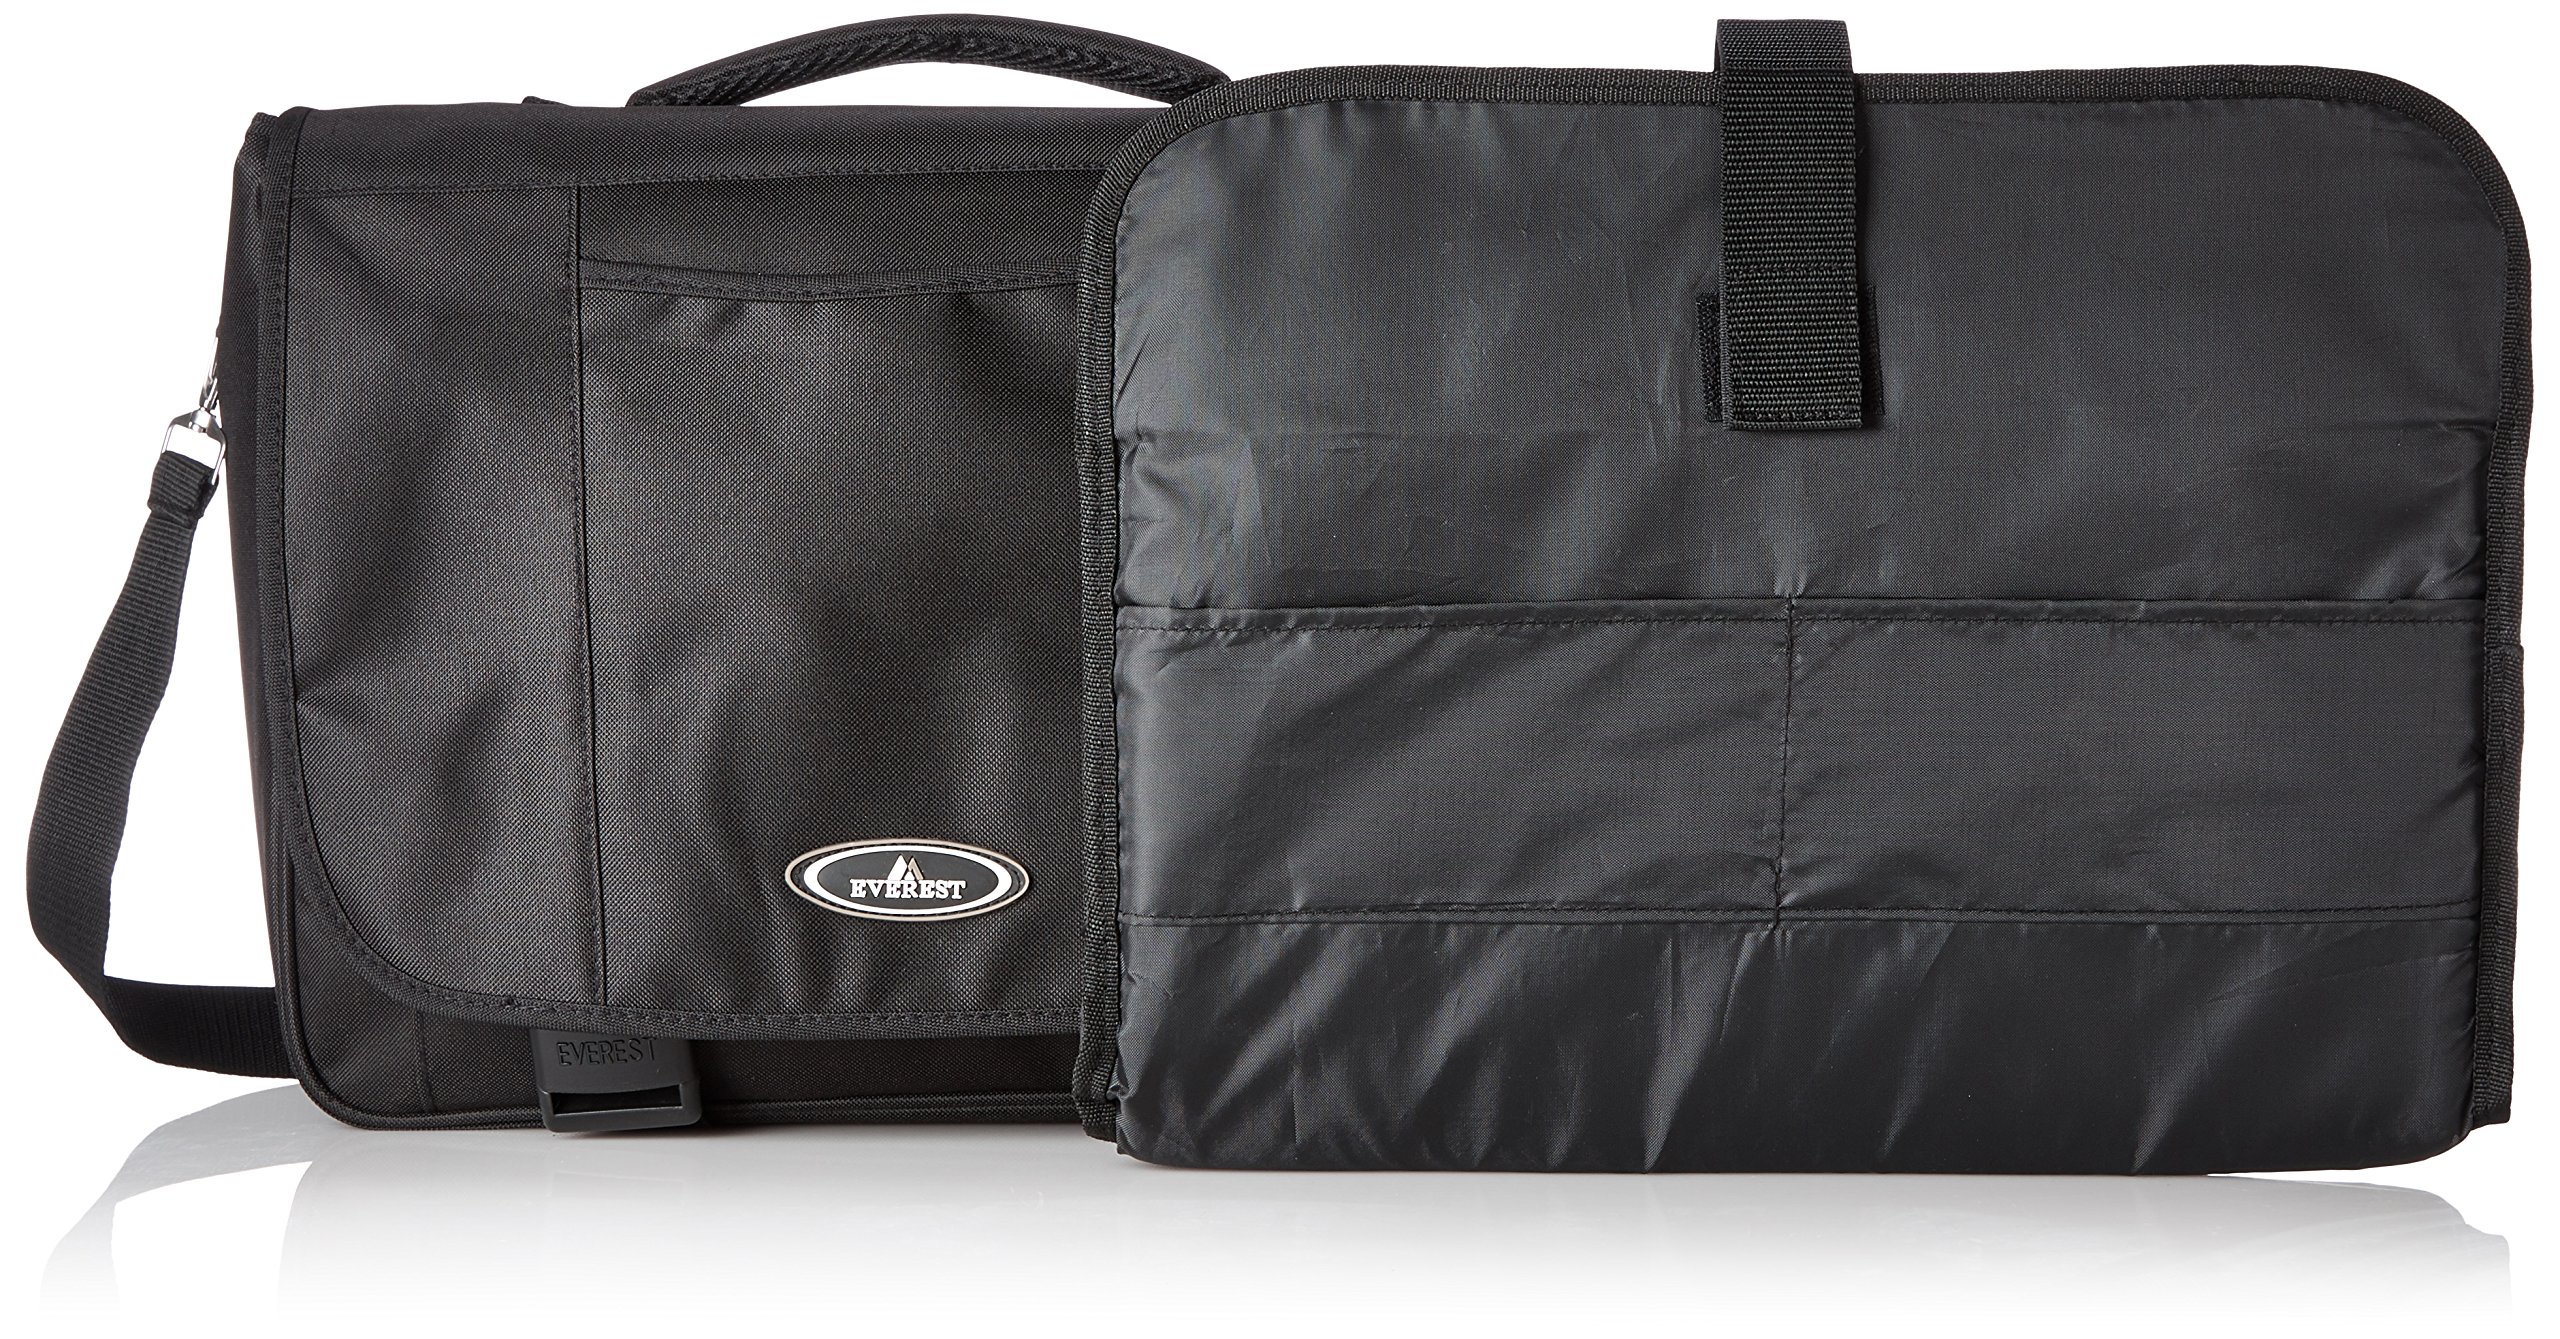 Everest Casual Laptop Briefcase, Black, One Size